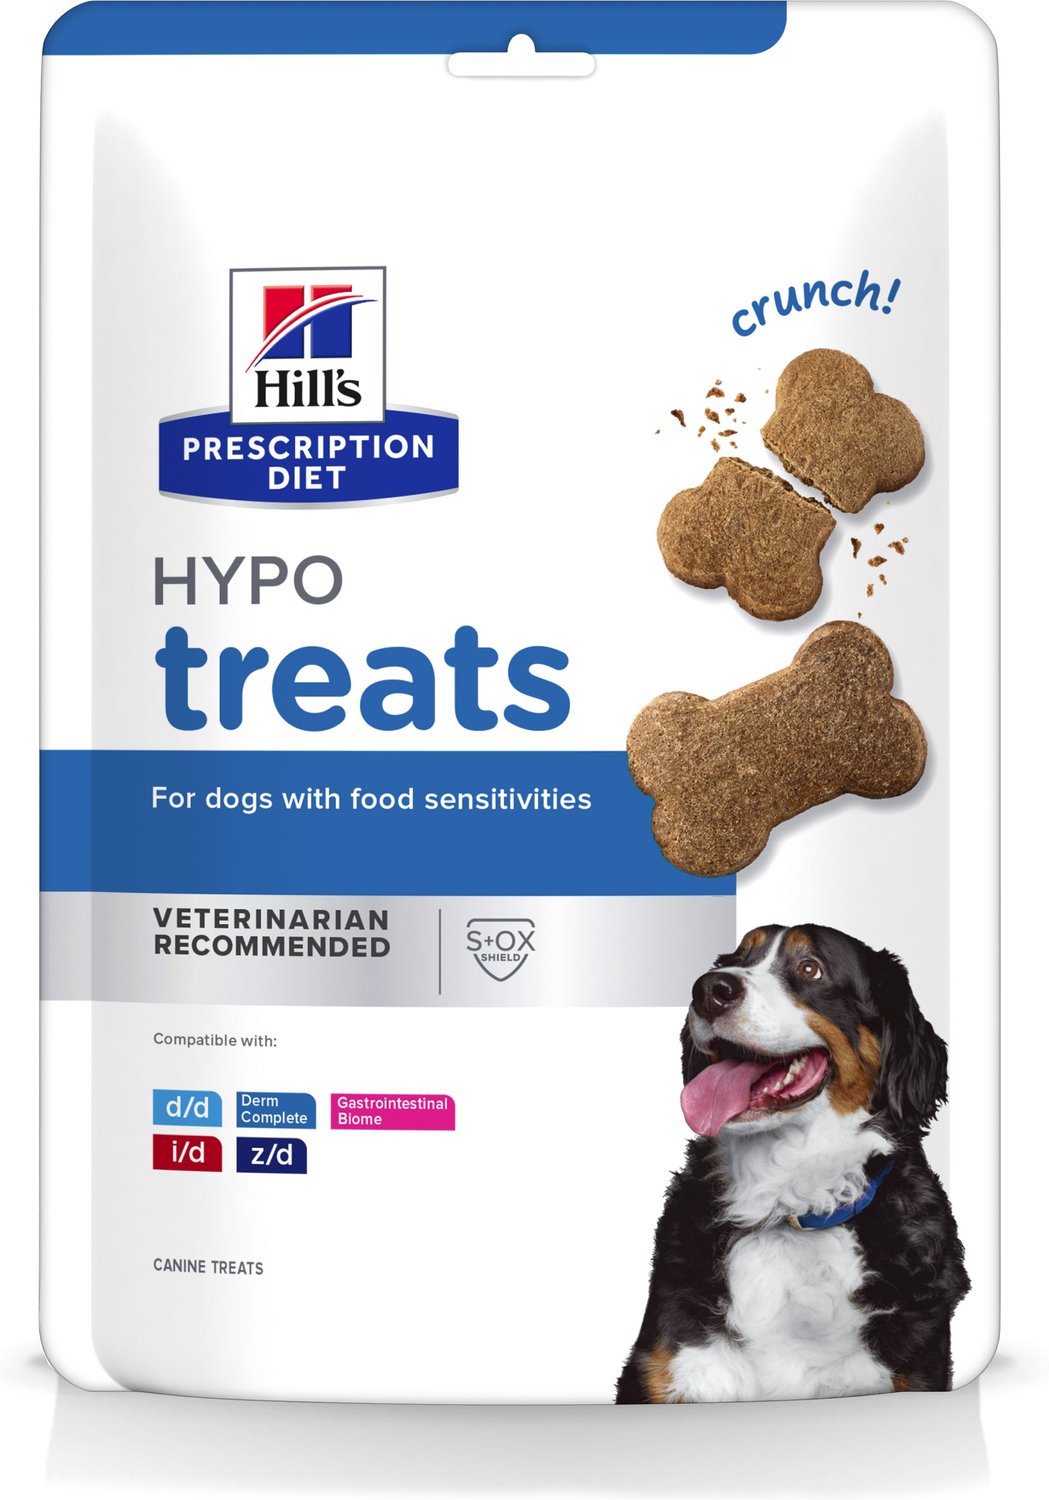 HILL'S PRESCRIPTION DIET HypoTreats Dog Treats (Free Shipping) Chewy